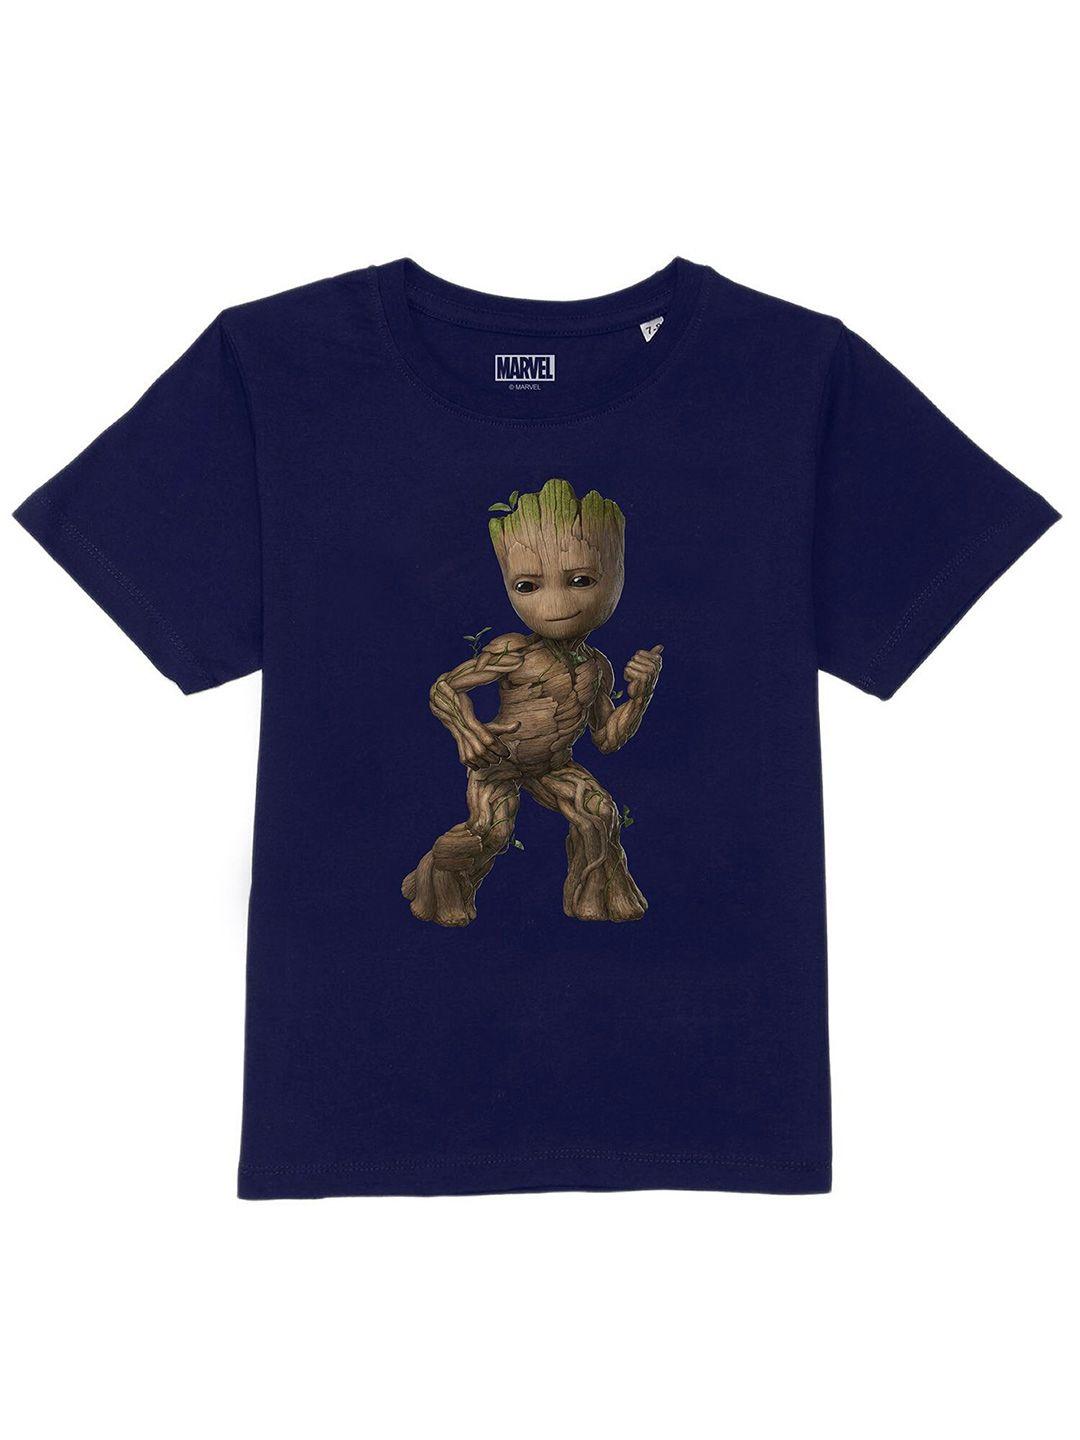 marvel-by-wear-your-mind-boys-navy-blue-printed-applique-t-shirt